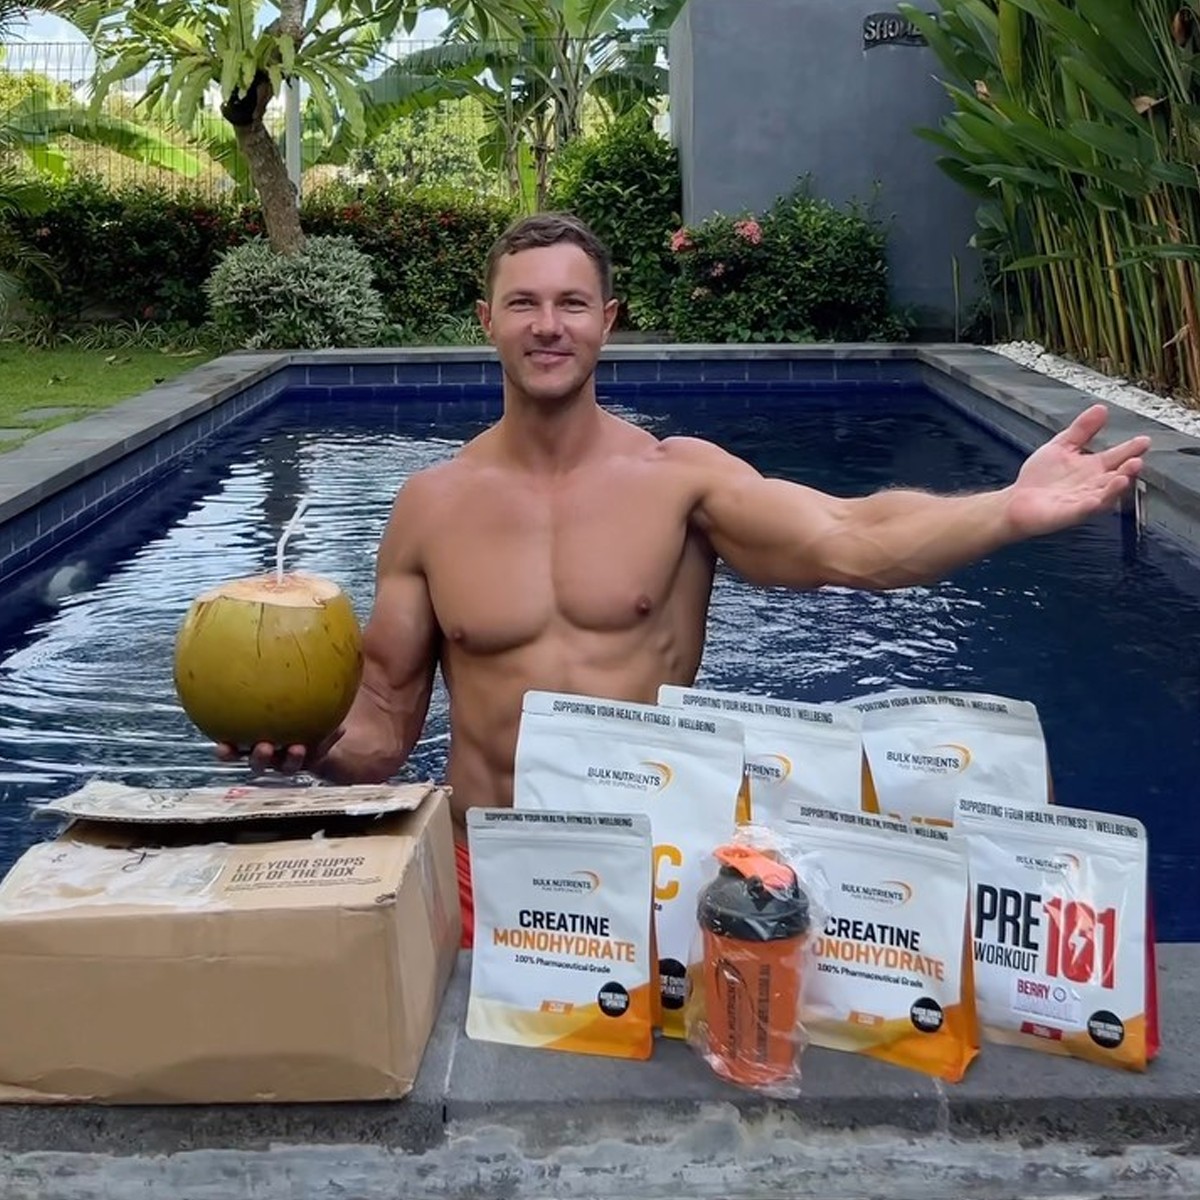 Bulk Nutrients Ambassador Ryan Van Duiven with Products by the Pool